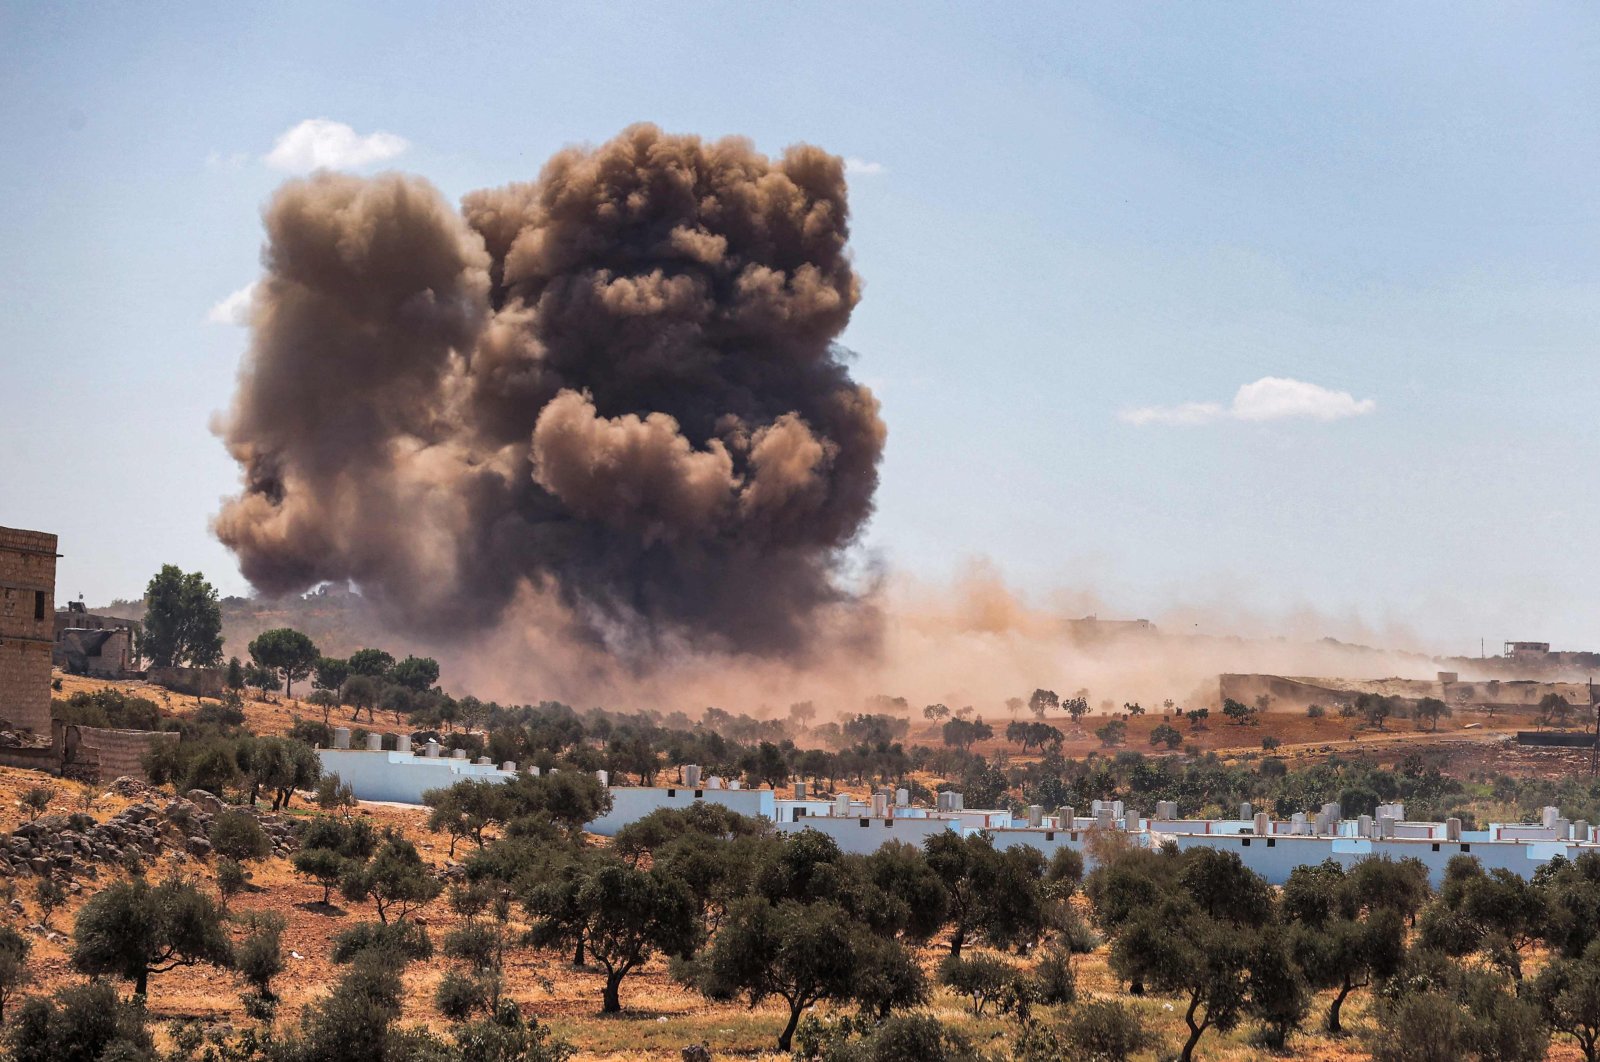 A smoke plume rising from aerial bombardment near a make-shift camp for displaced Syrians near the town of Kafraya in the north of Idlib province, northwestern Syria, Sept. 7, 2021. (AFP Photo)